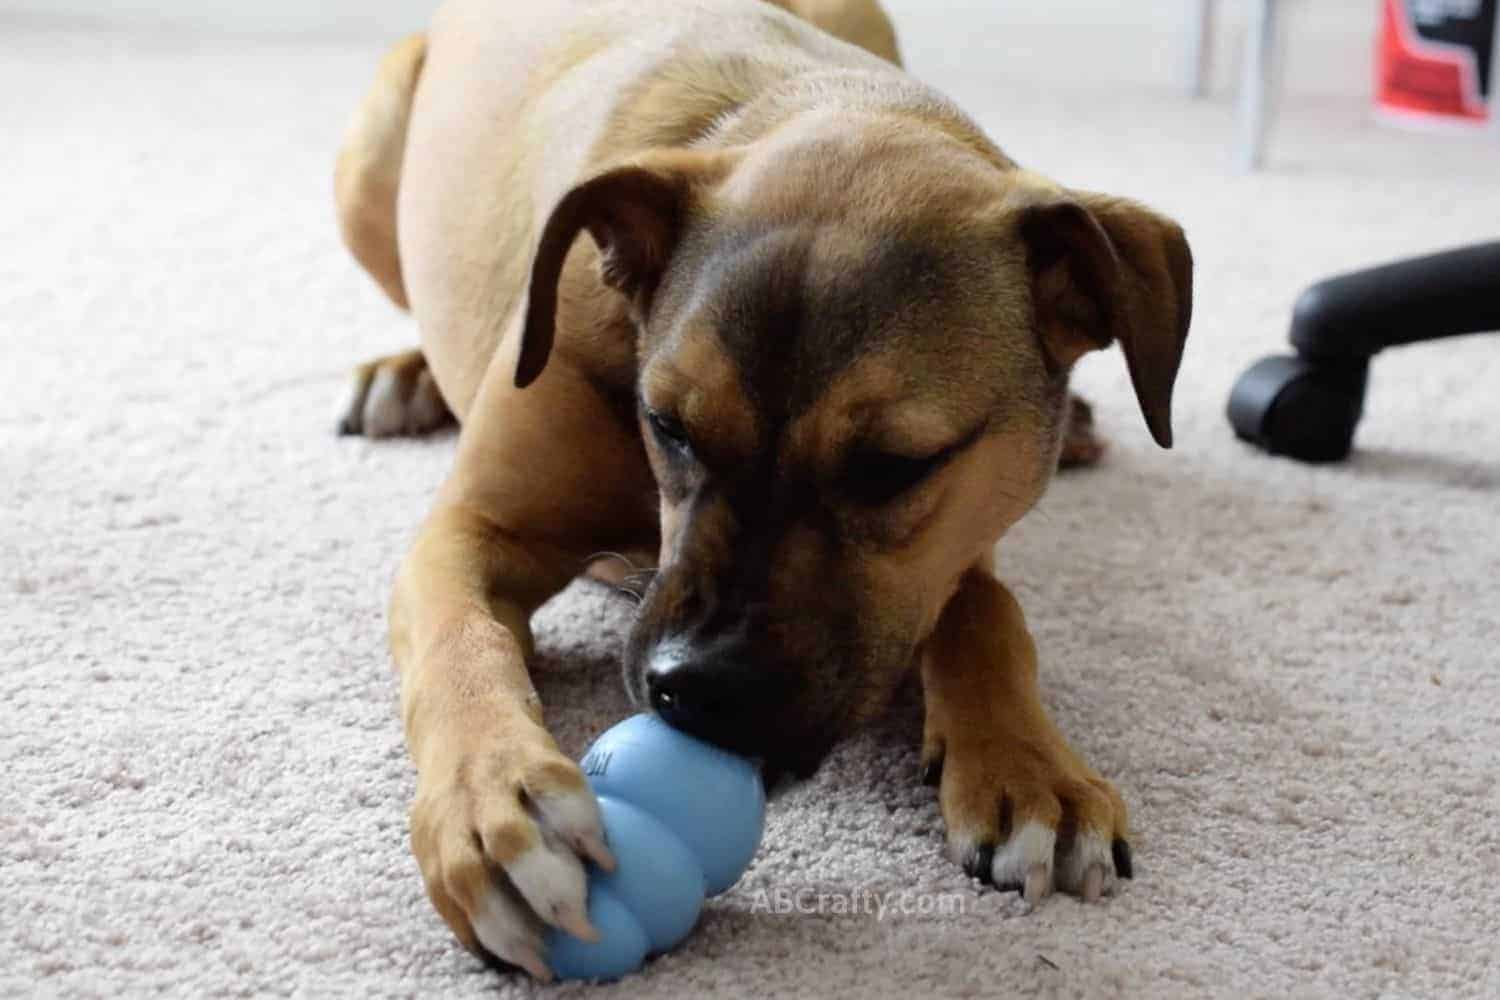 Boxer mix puppy eating treats from a blue puppy kong